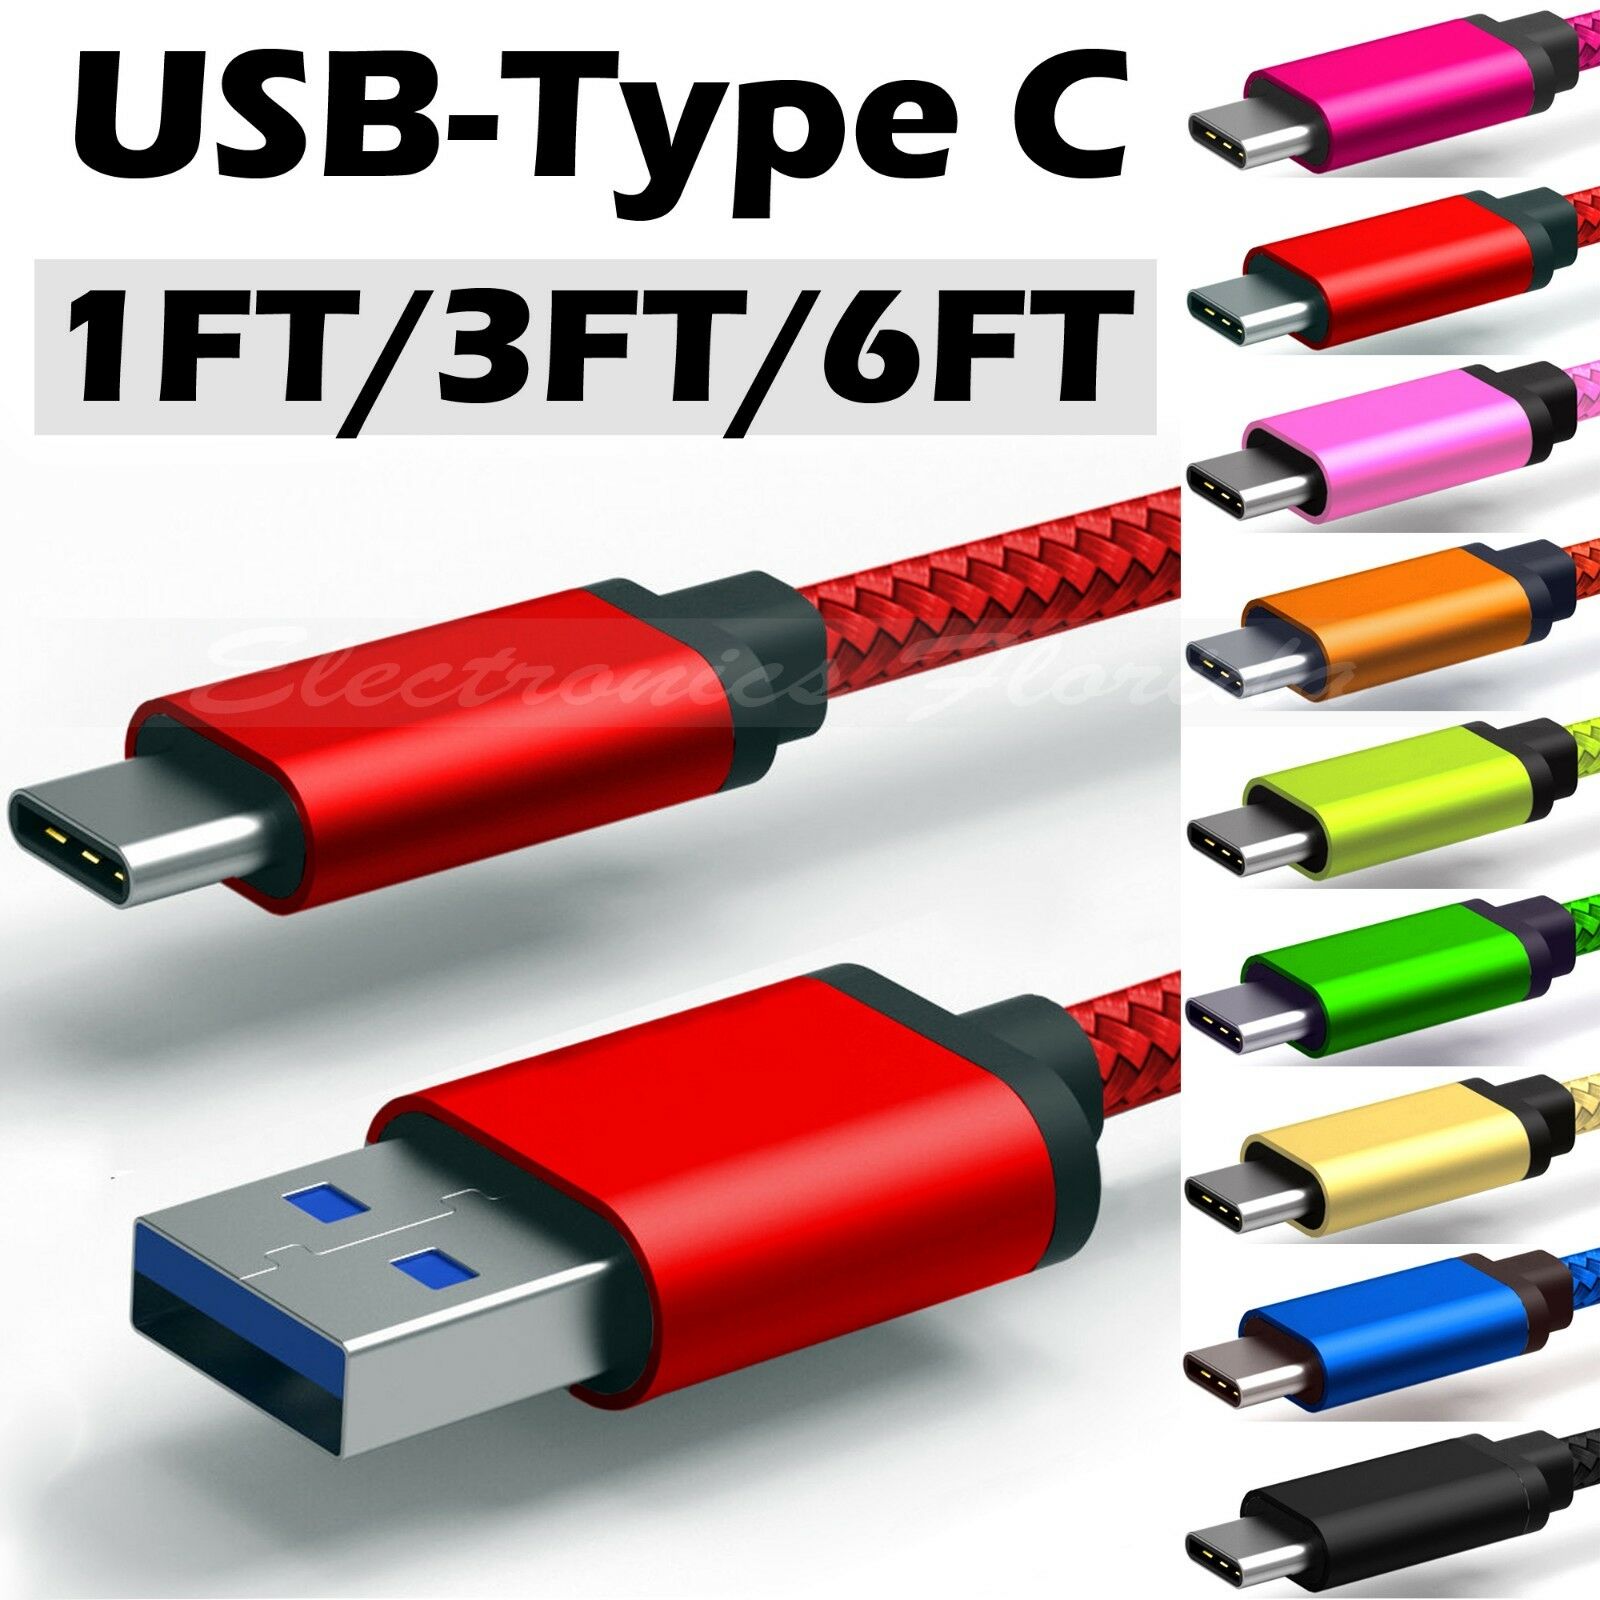 ✔ Nylon Braided Rope Usb-c Type C Data Sync Charger Charging Cable Cord - Lot